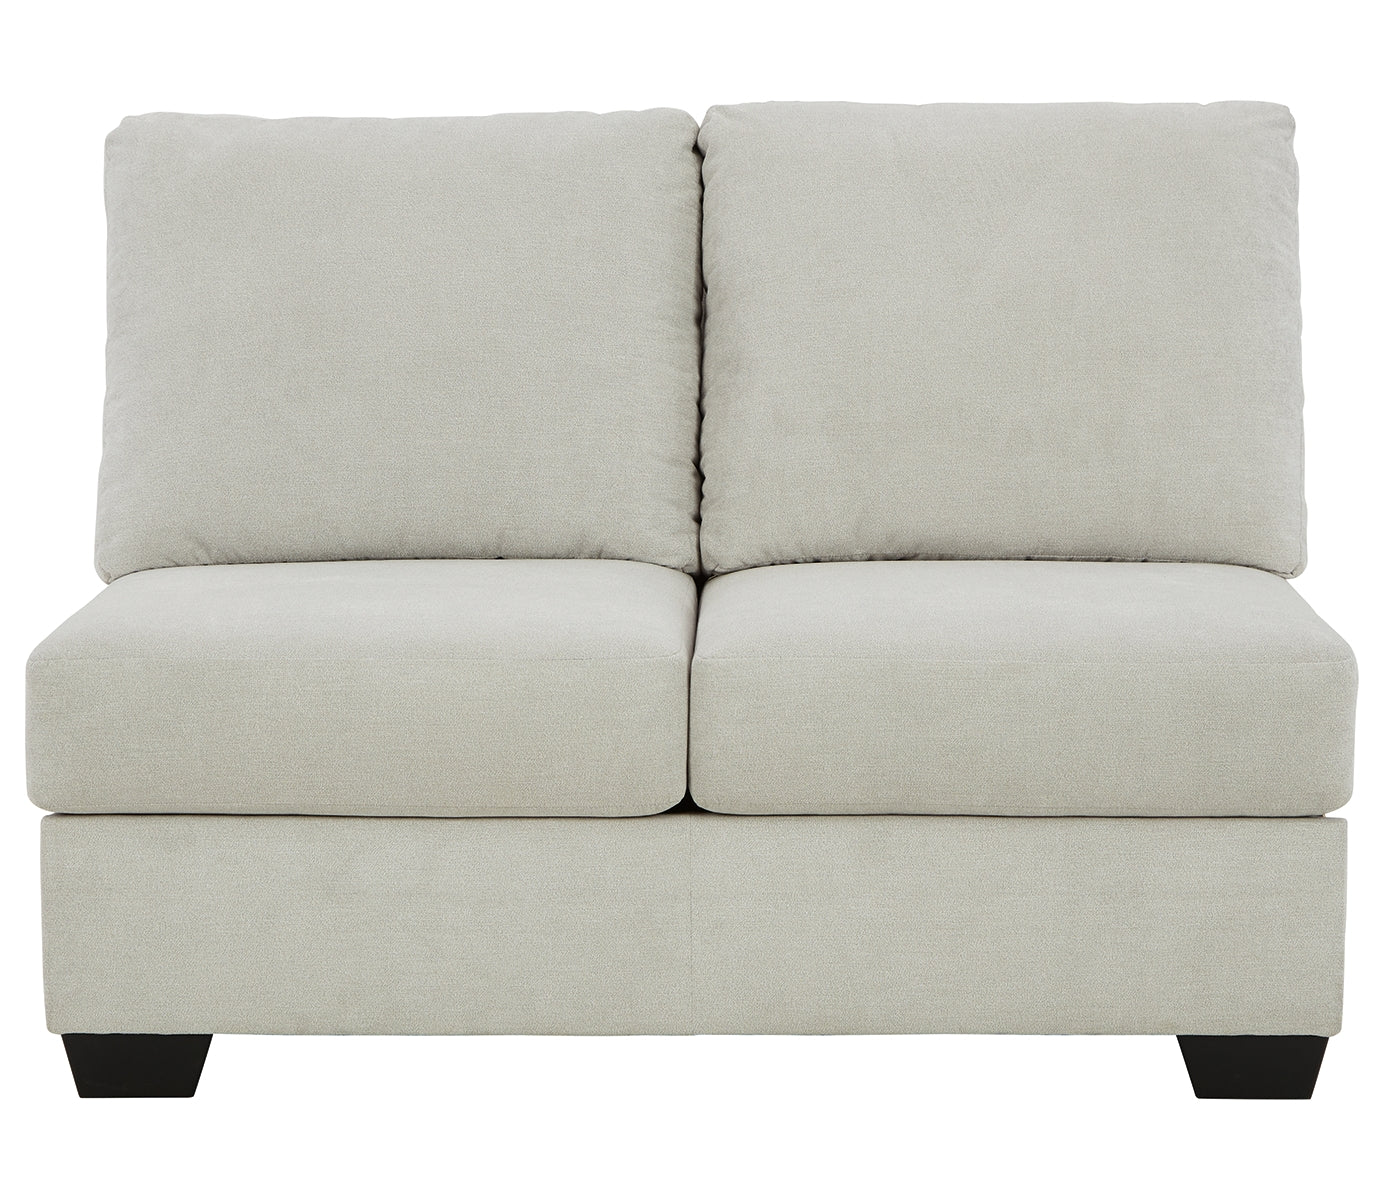 Lowder 4-Piece Sectional with Ottoman